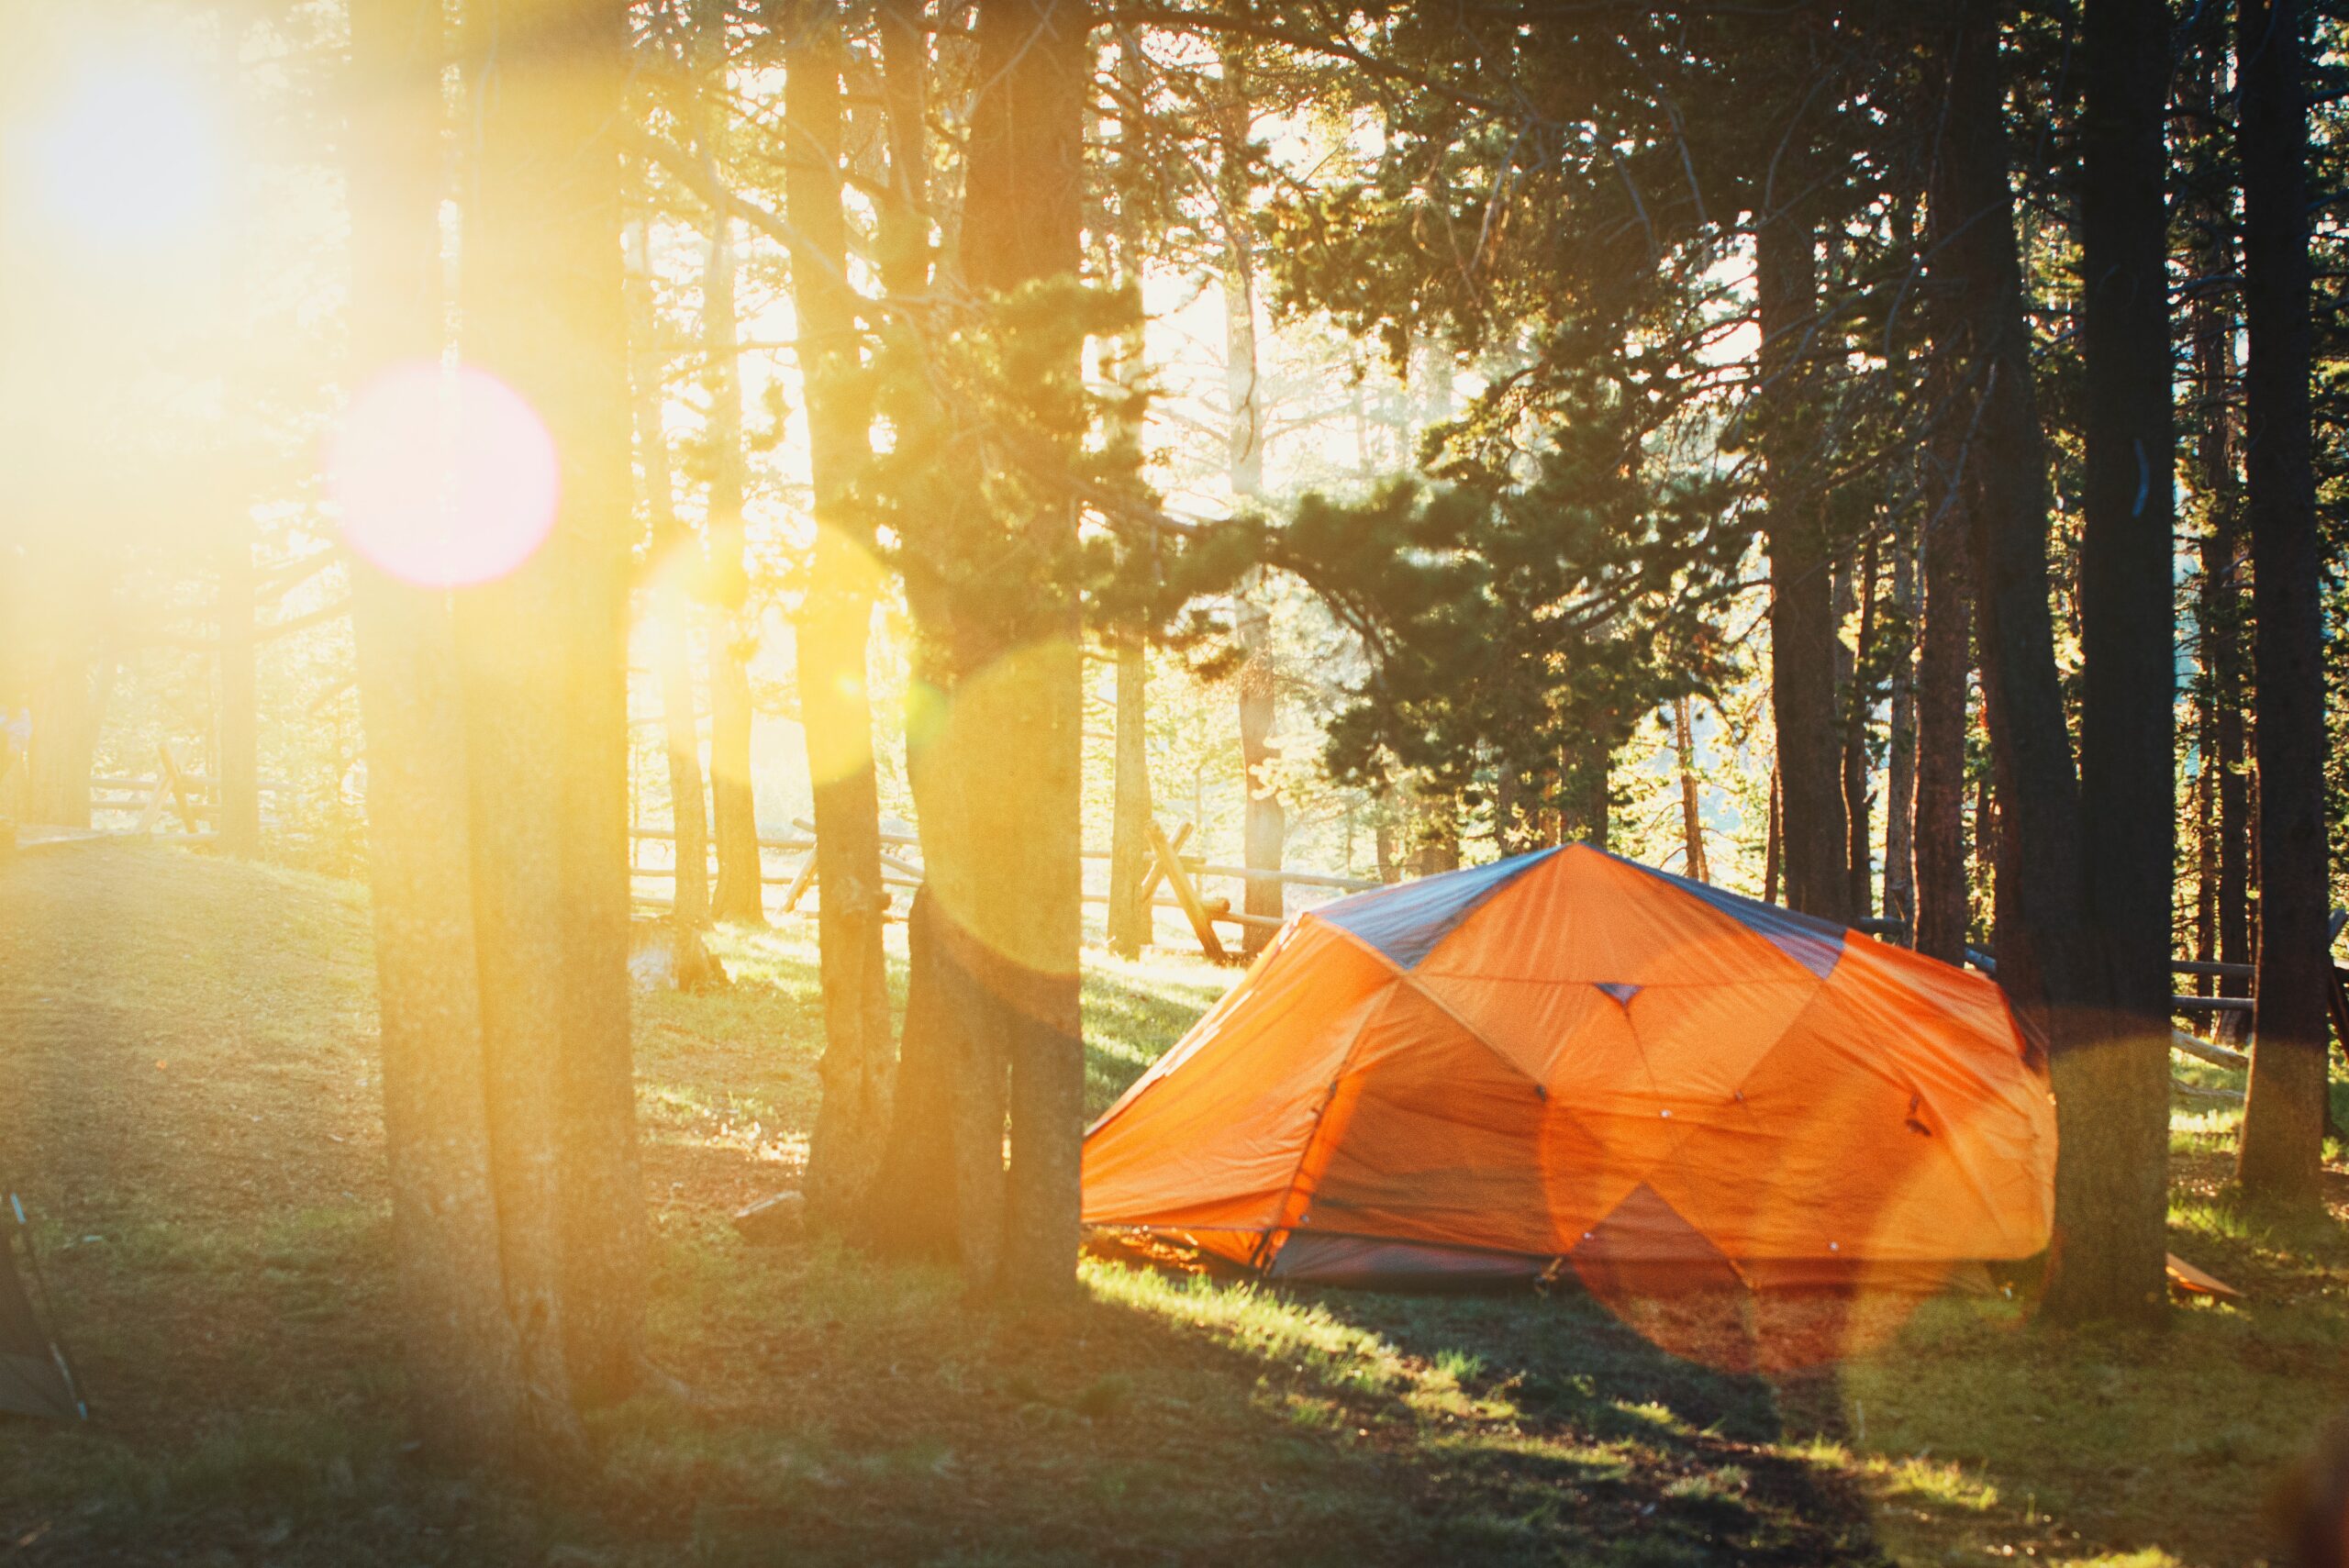 How To Use A Battery Powered Heater For Camping: 7 Ways To A Warm Tent!